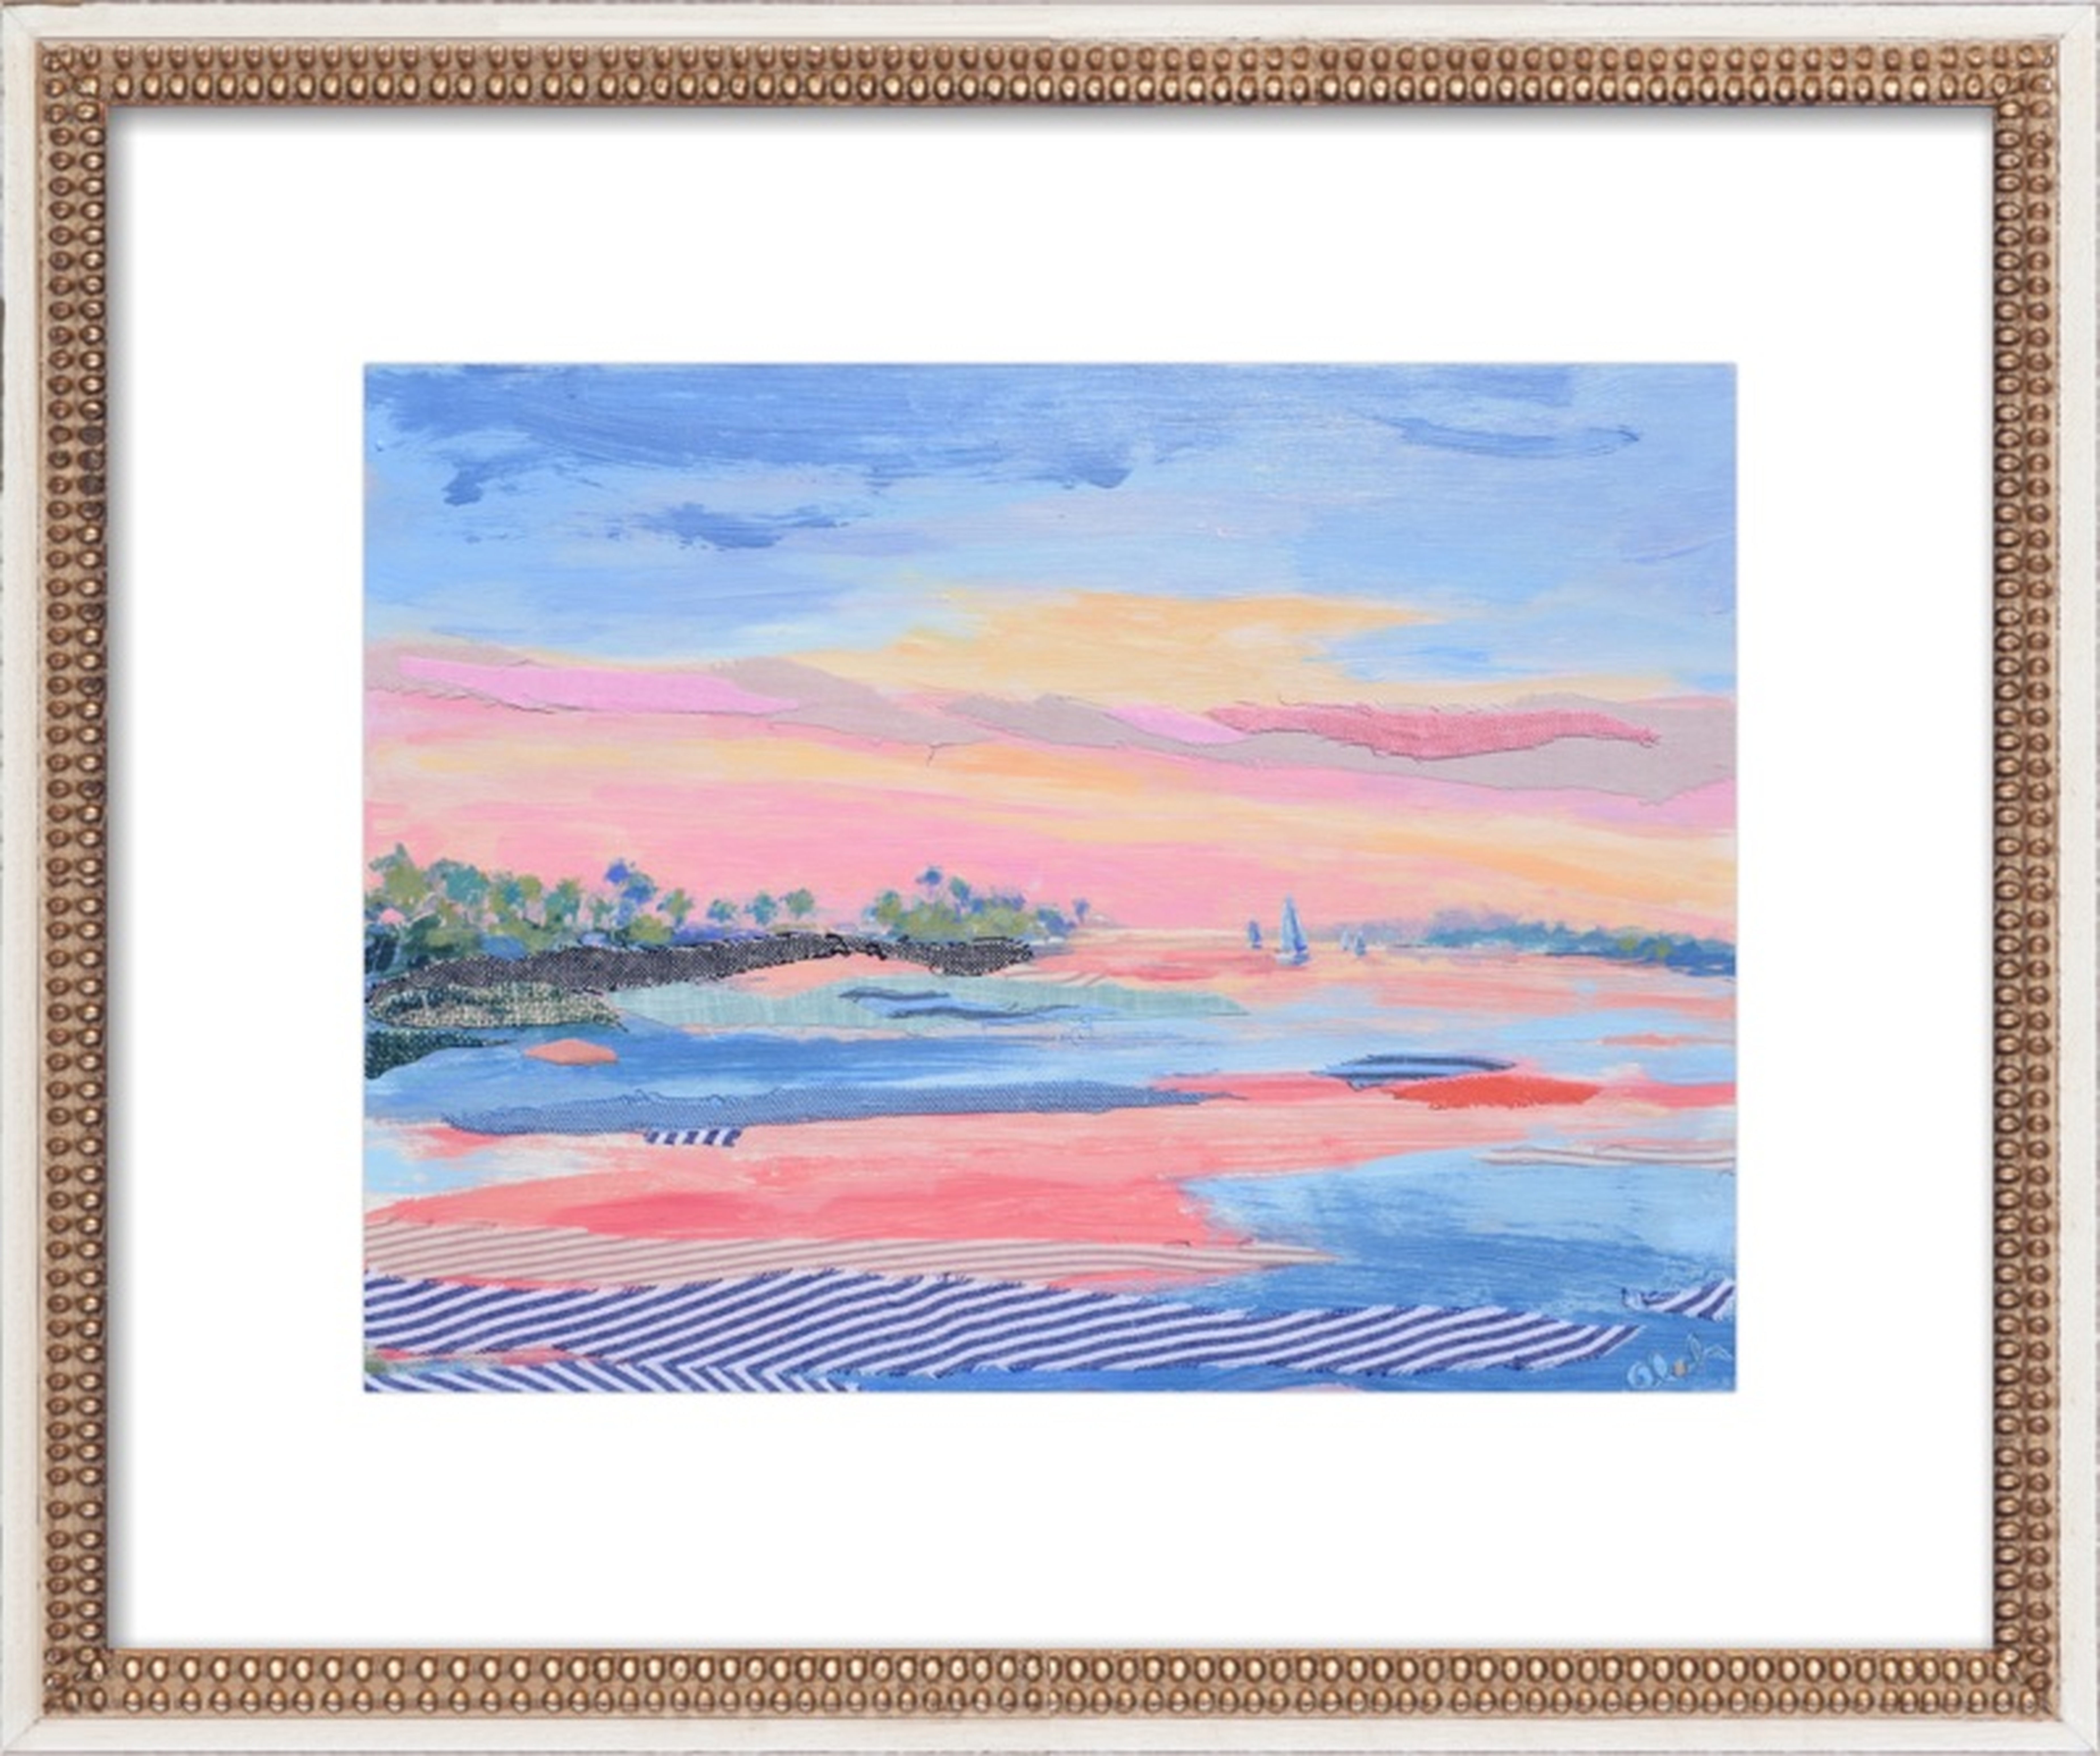 Sunset Stripes 7 by Karin Olah for Artfully Walls  16 x 20 - Framed:  Distressed Cream Double Bead Wood, frame width 1.25", depth 1.69" - Artfully Walls